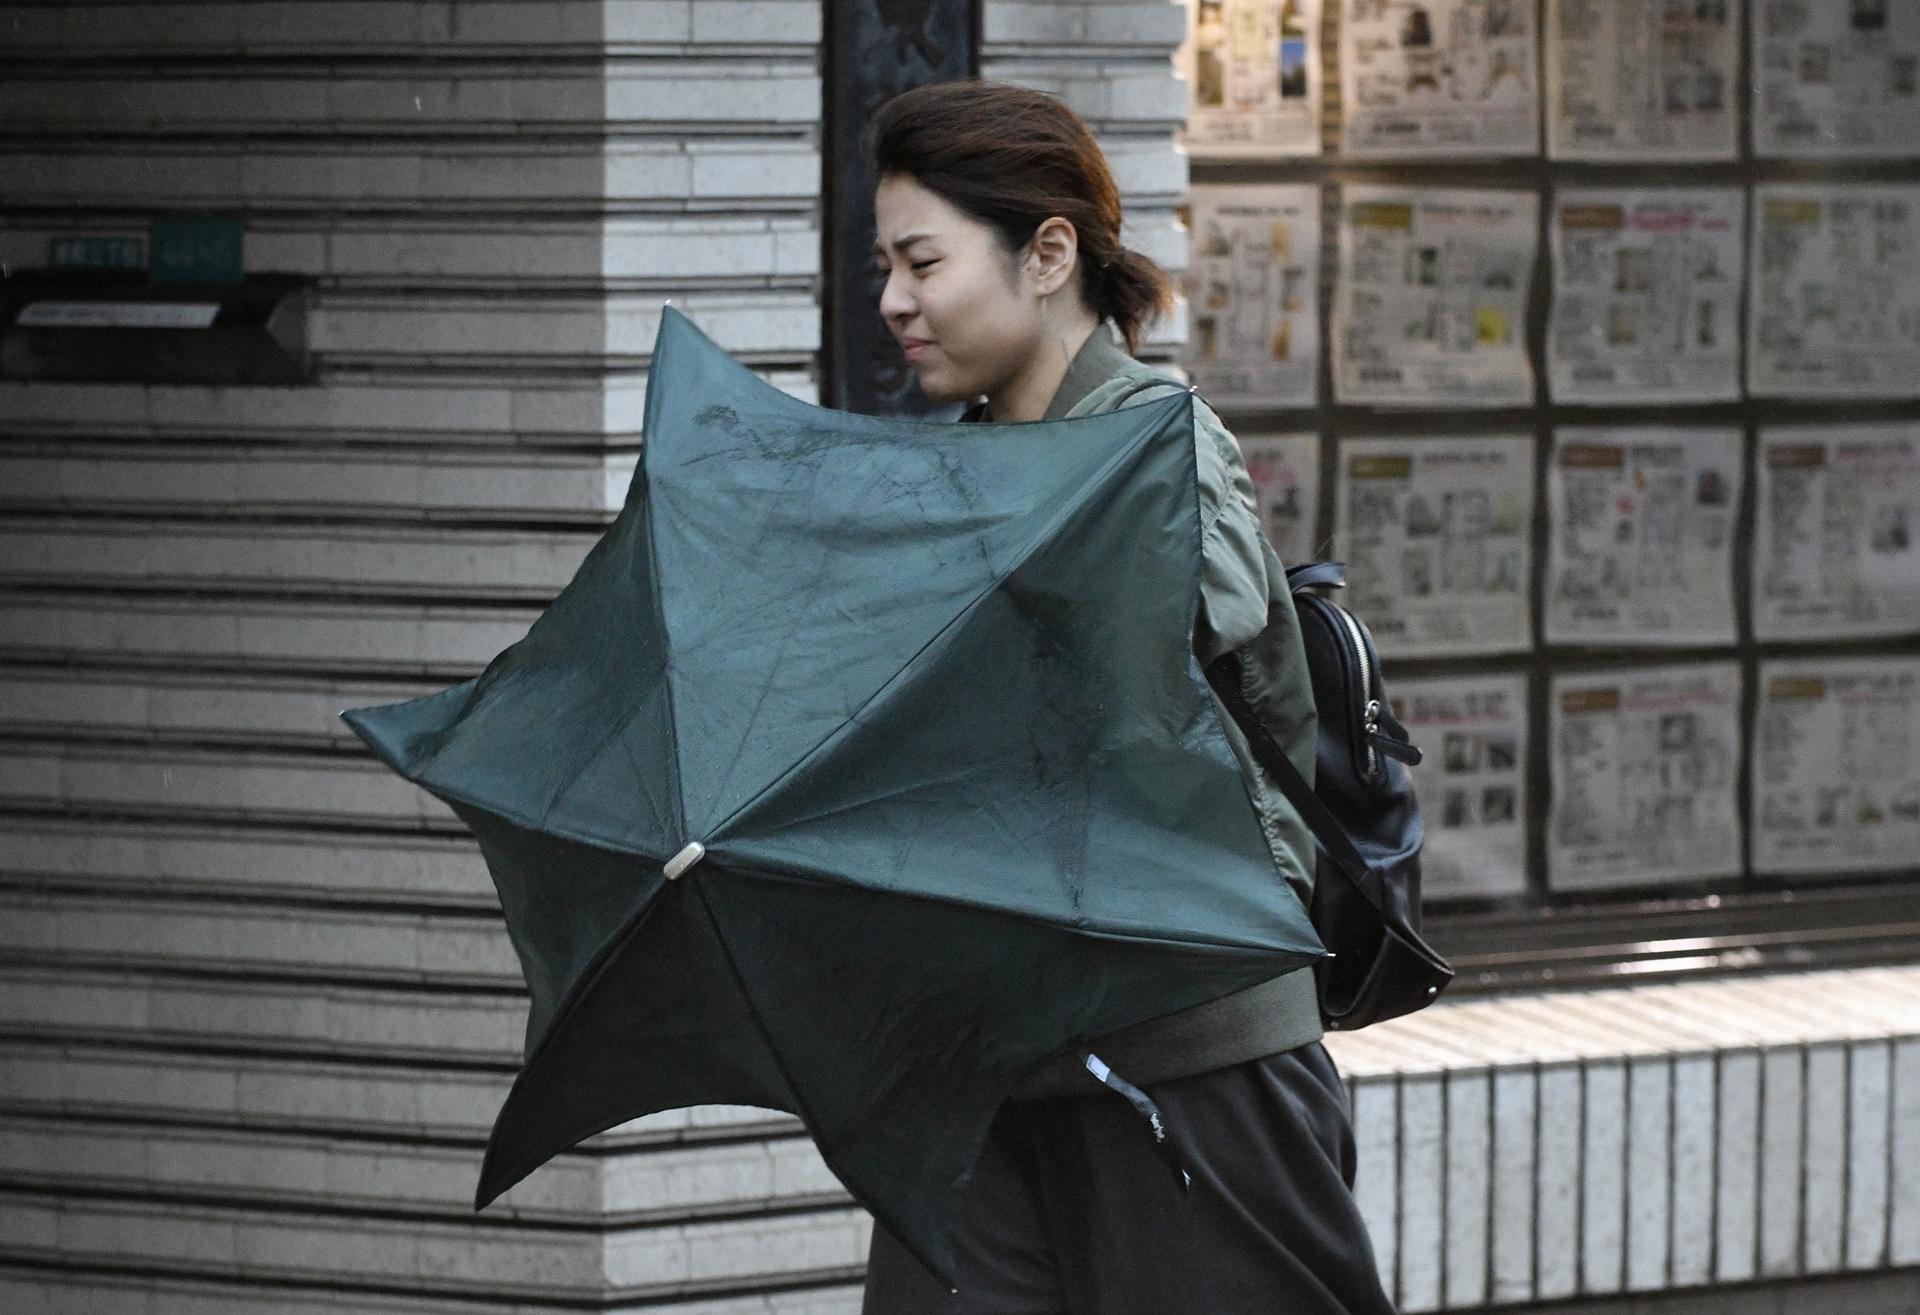 A woman uses an umbrella to shield herself from strong wind in Tokyo, Japan, 23 October 2017. EFE-EPA FILE/FRANCK ROBICHON